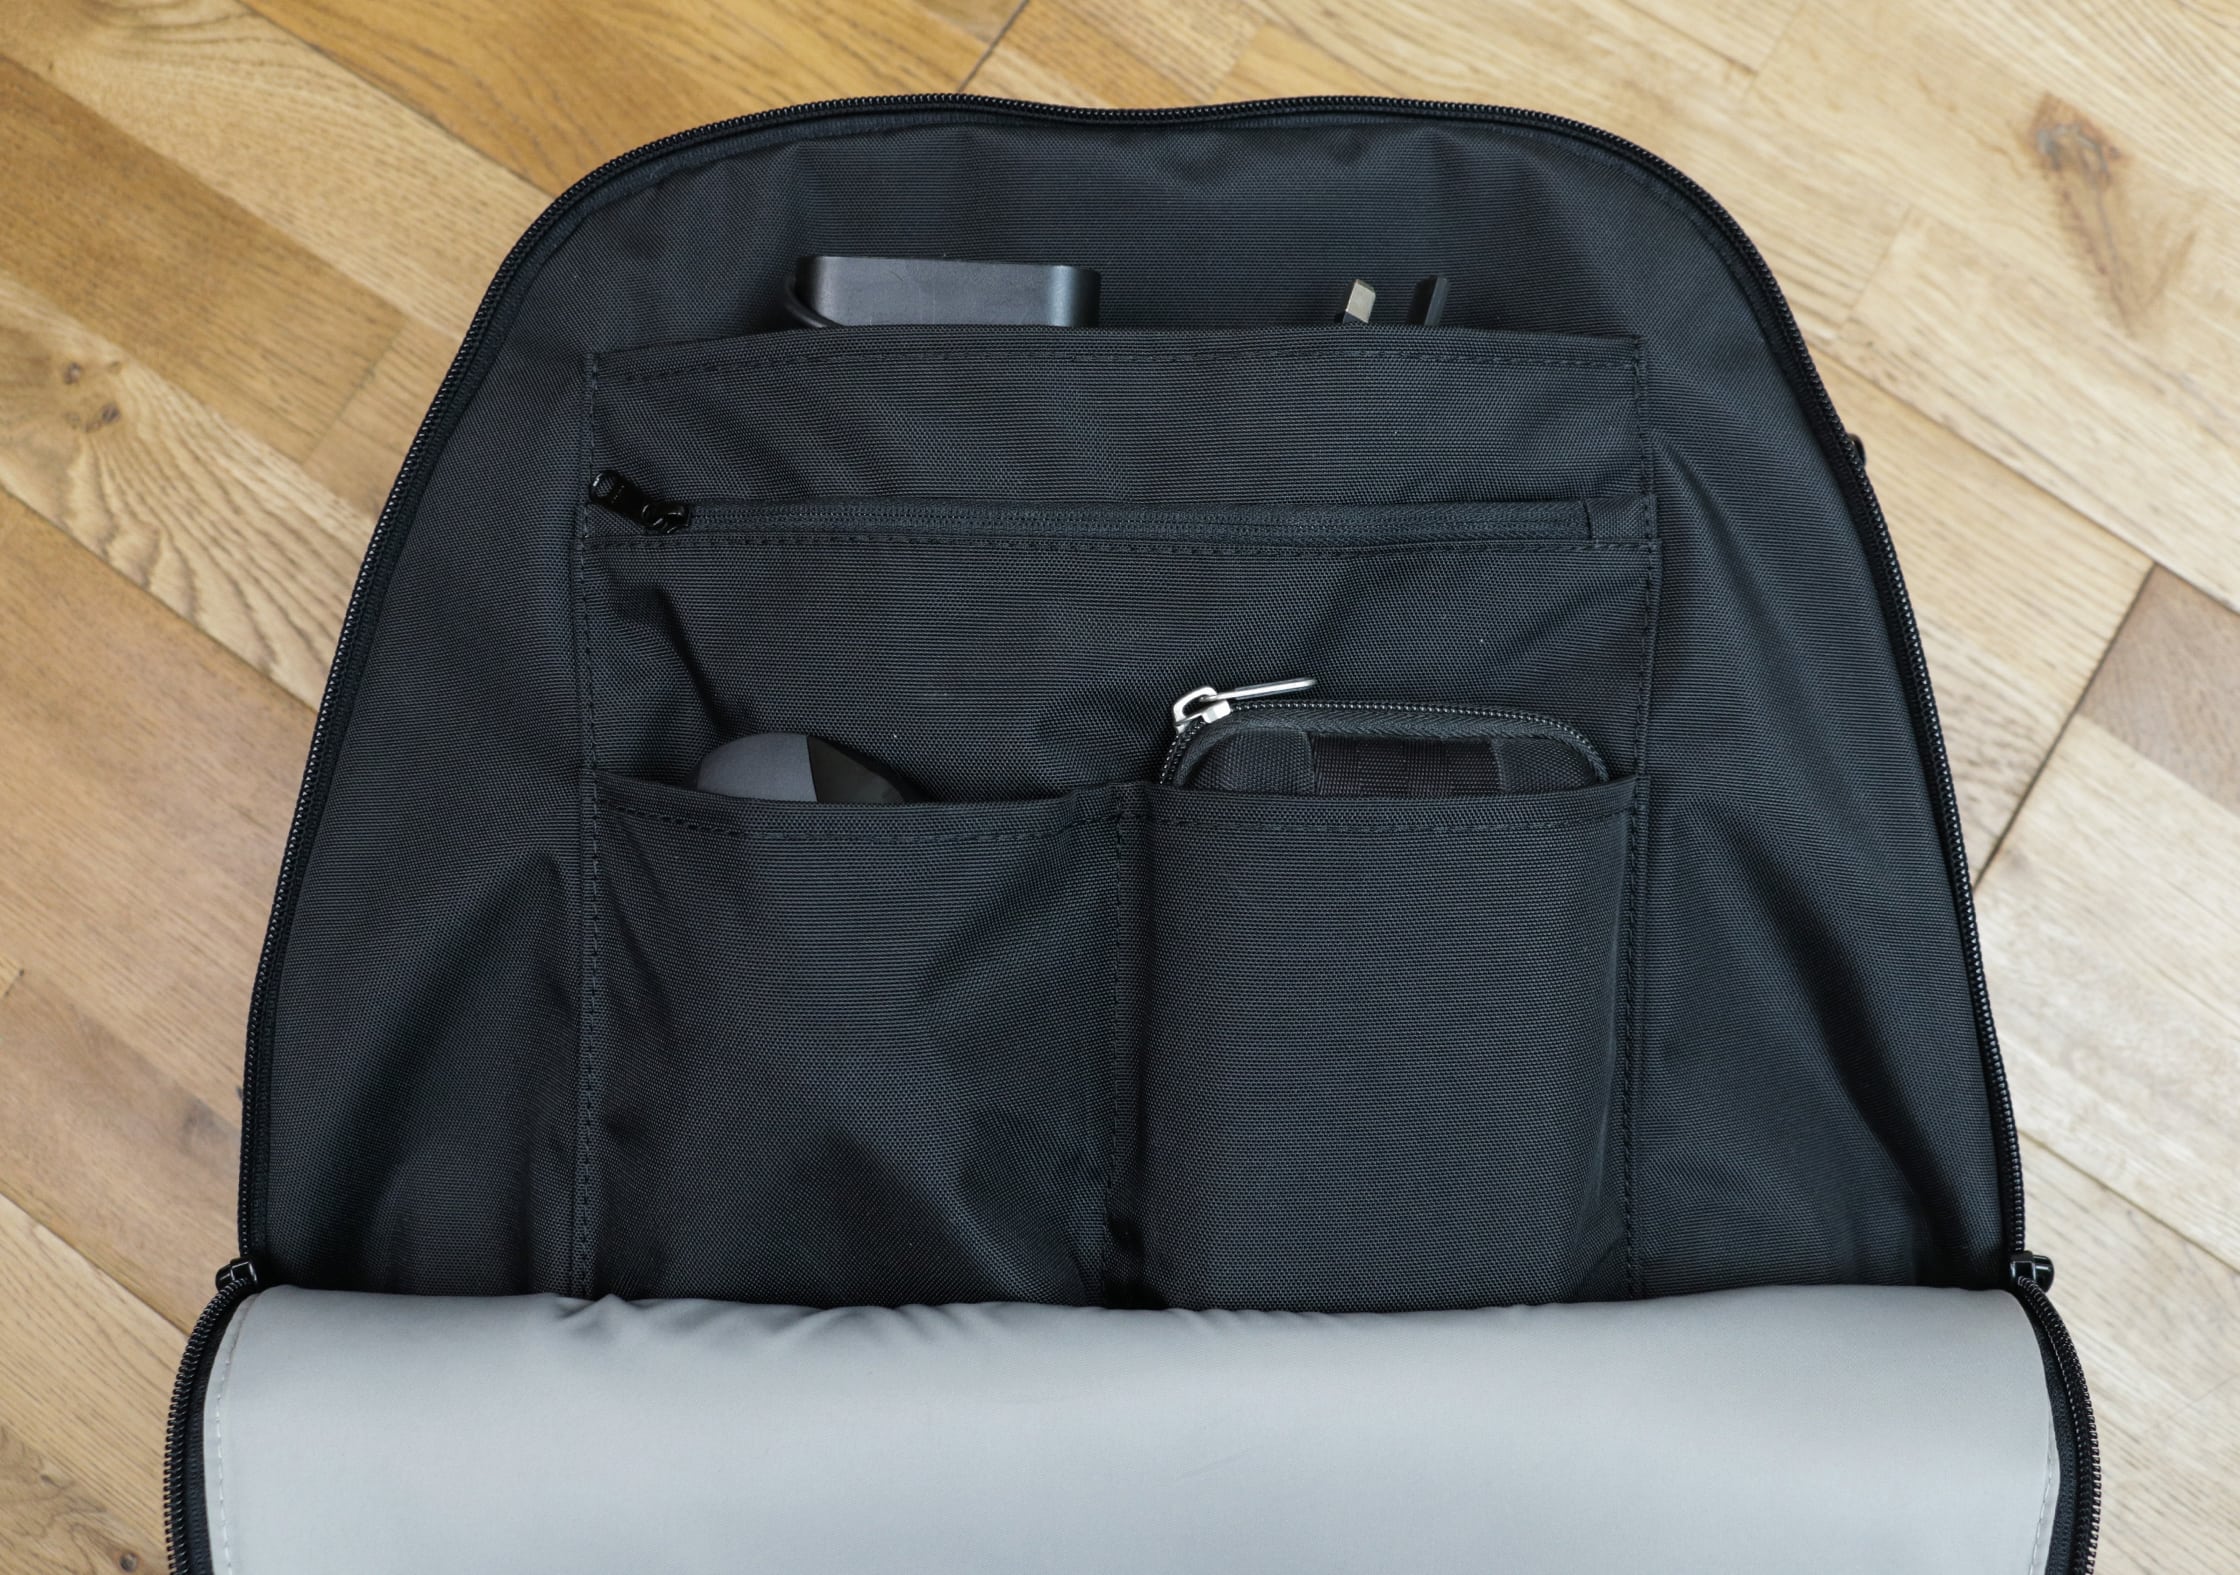 OPPOSETHIS Invisible Carry-On Front Compartment Organization System